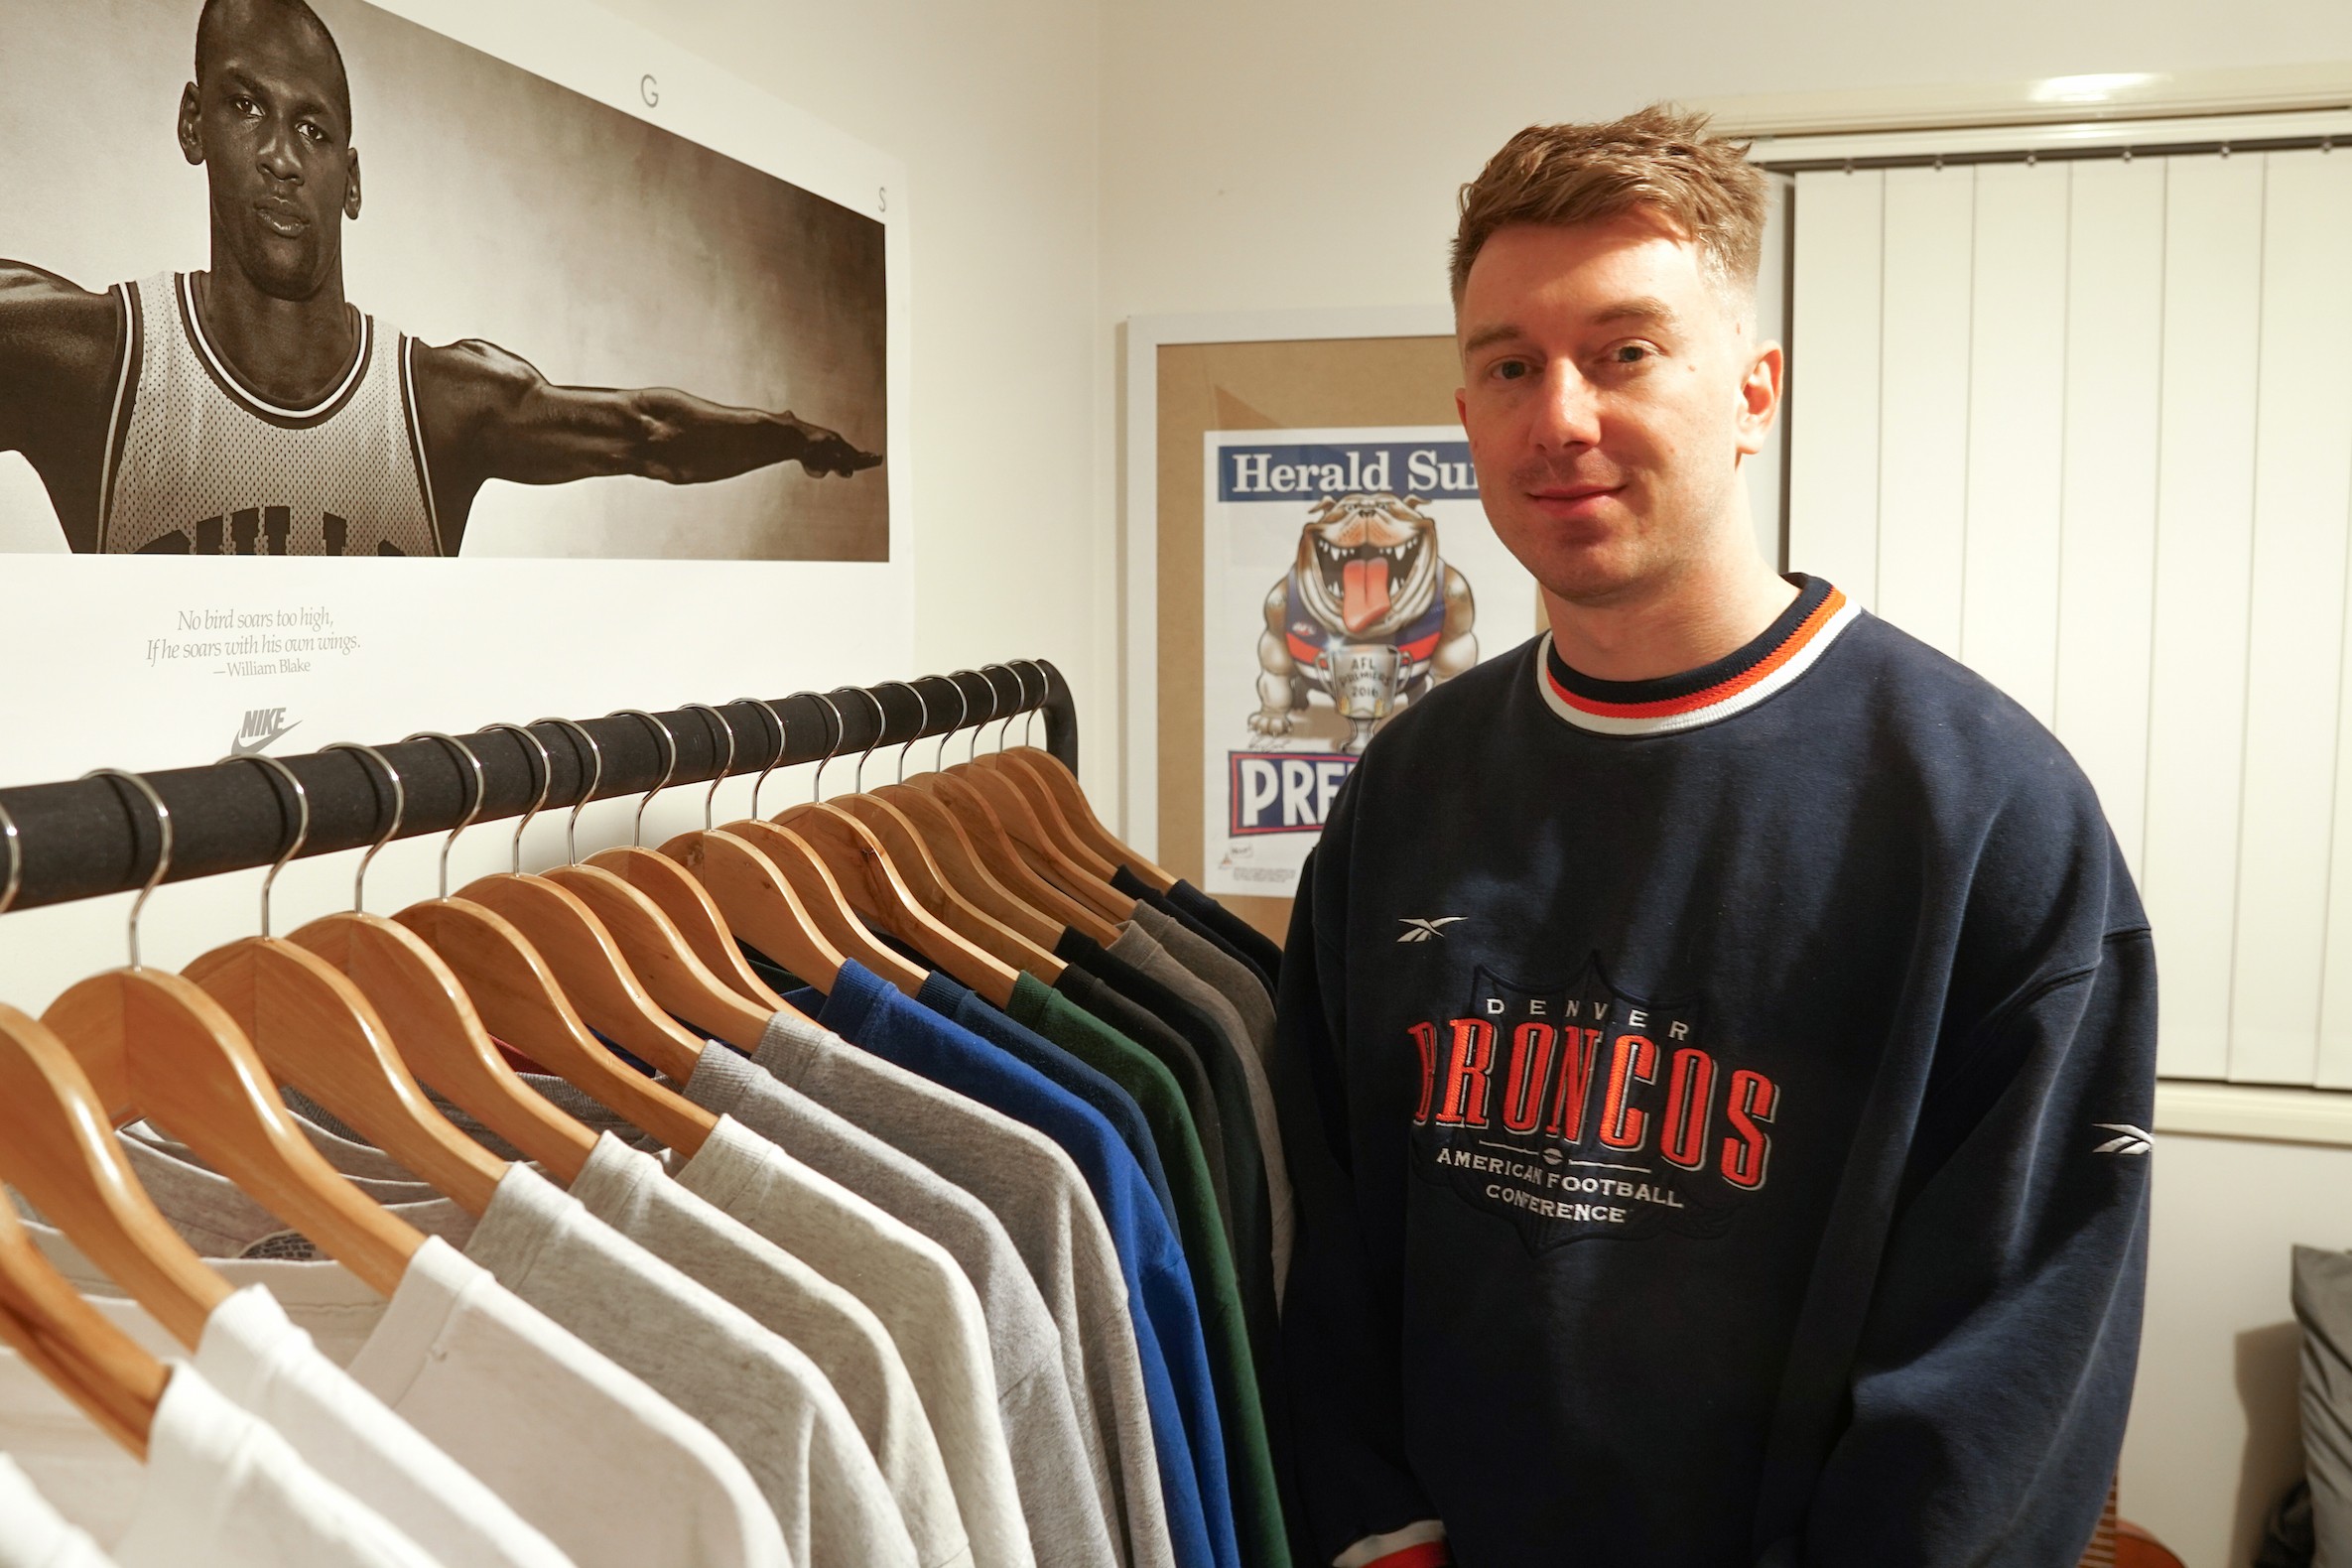 If the cap fits, share it: how a Gungahlin sports fan used lockdown to build a side hustle